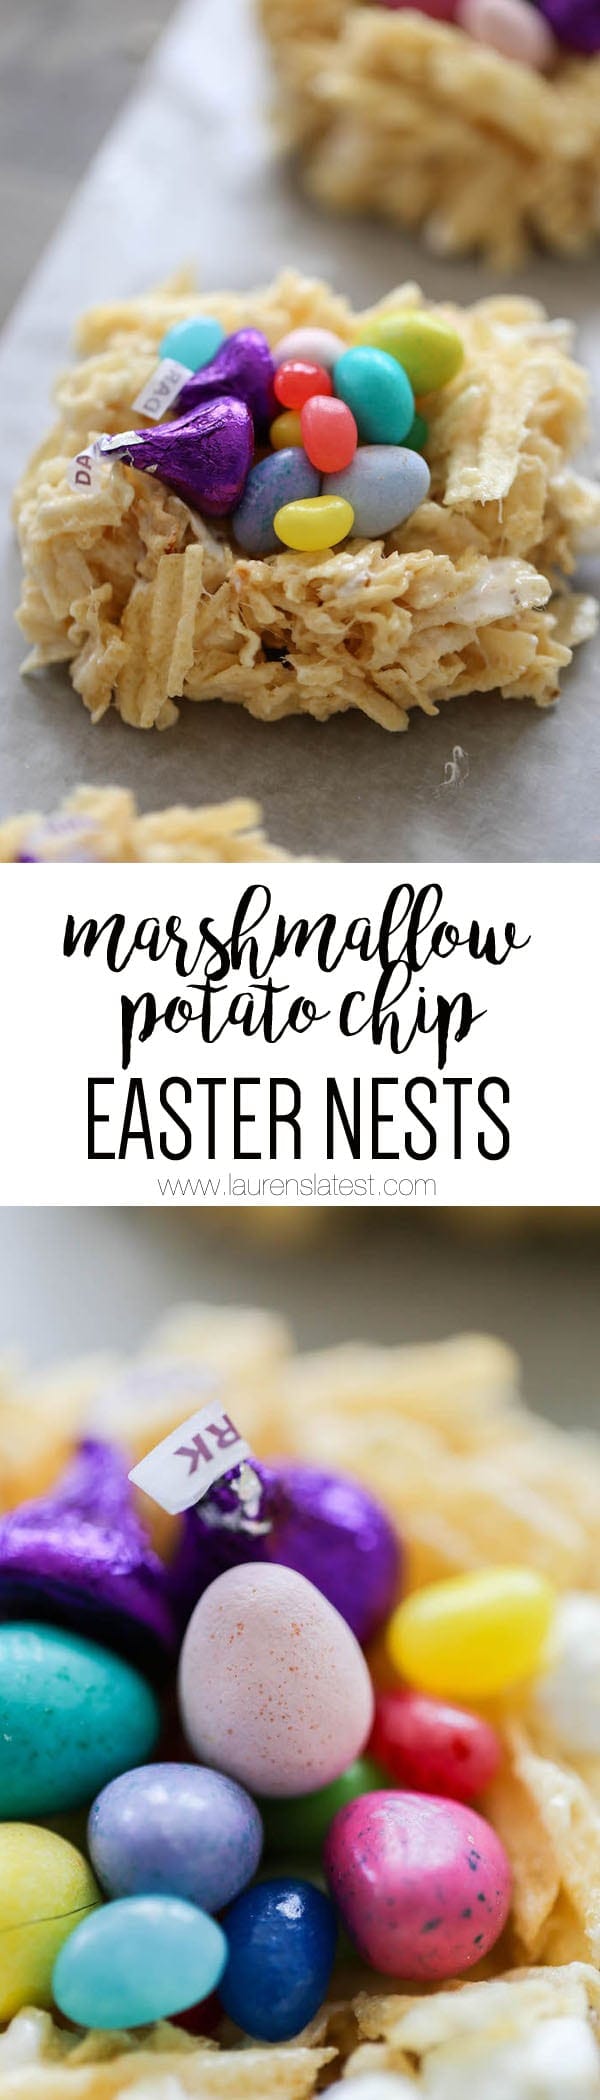 Marshmallow Potato Chip Easter Nests are treats you need in your life! Mix together melted butter, marshmallows and crushed chips to create these weird and wonderful Easter sweets!